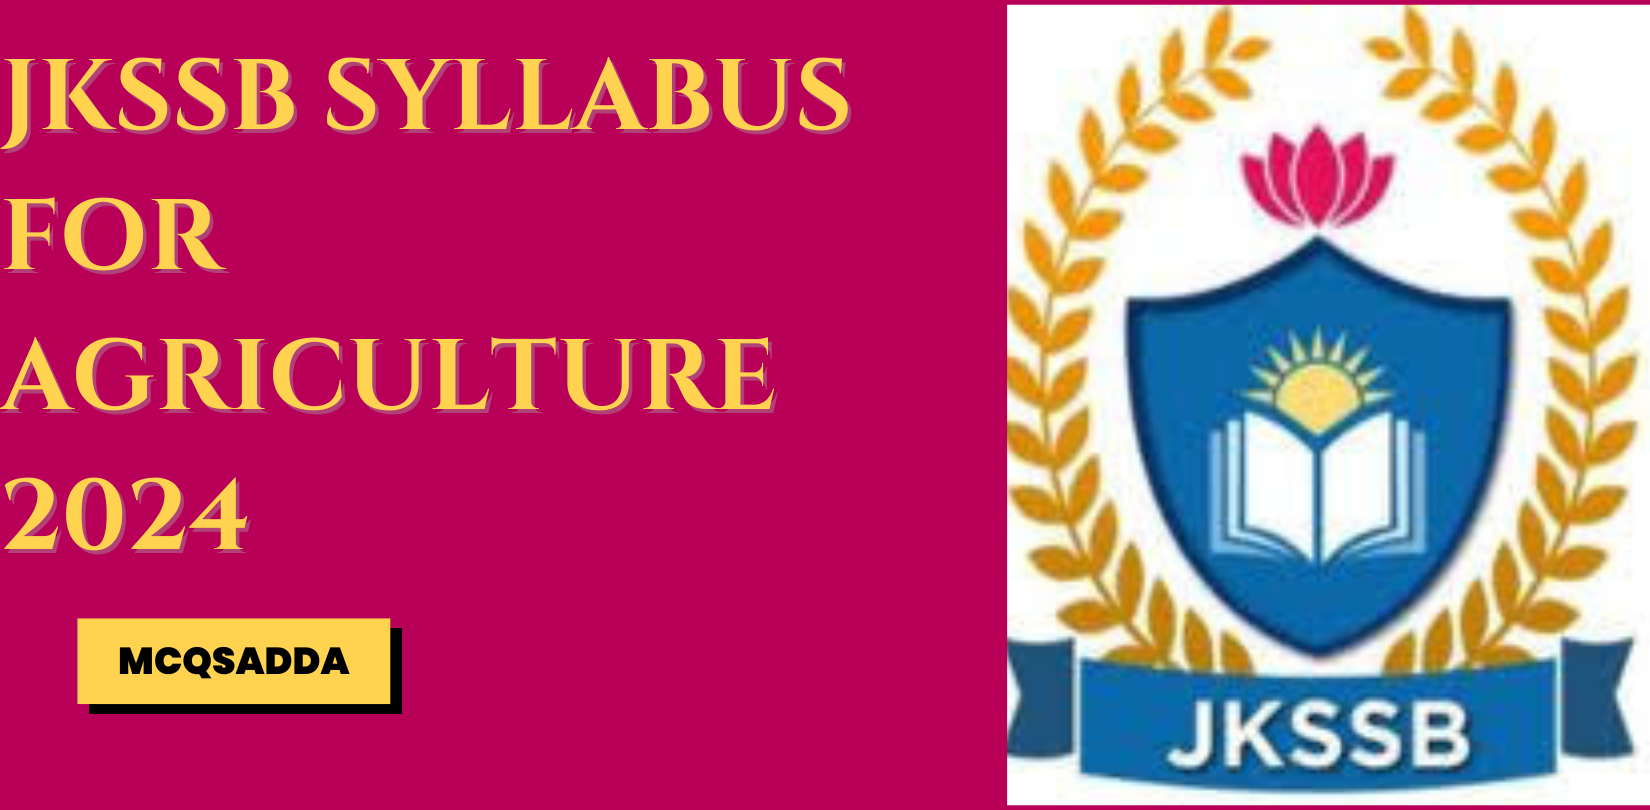 Jkssb Syllabus for Agriculture 2024